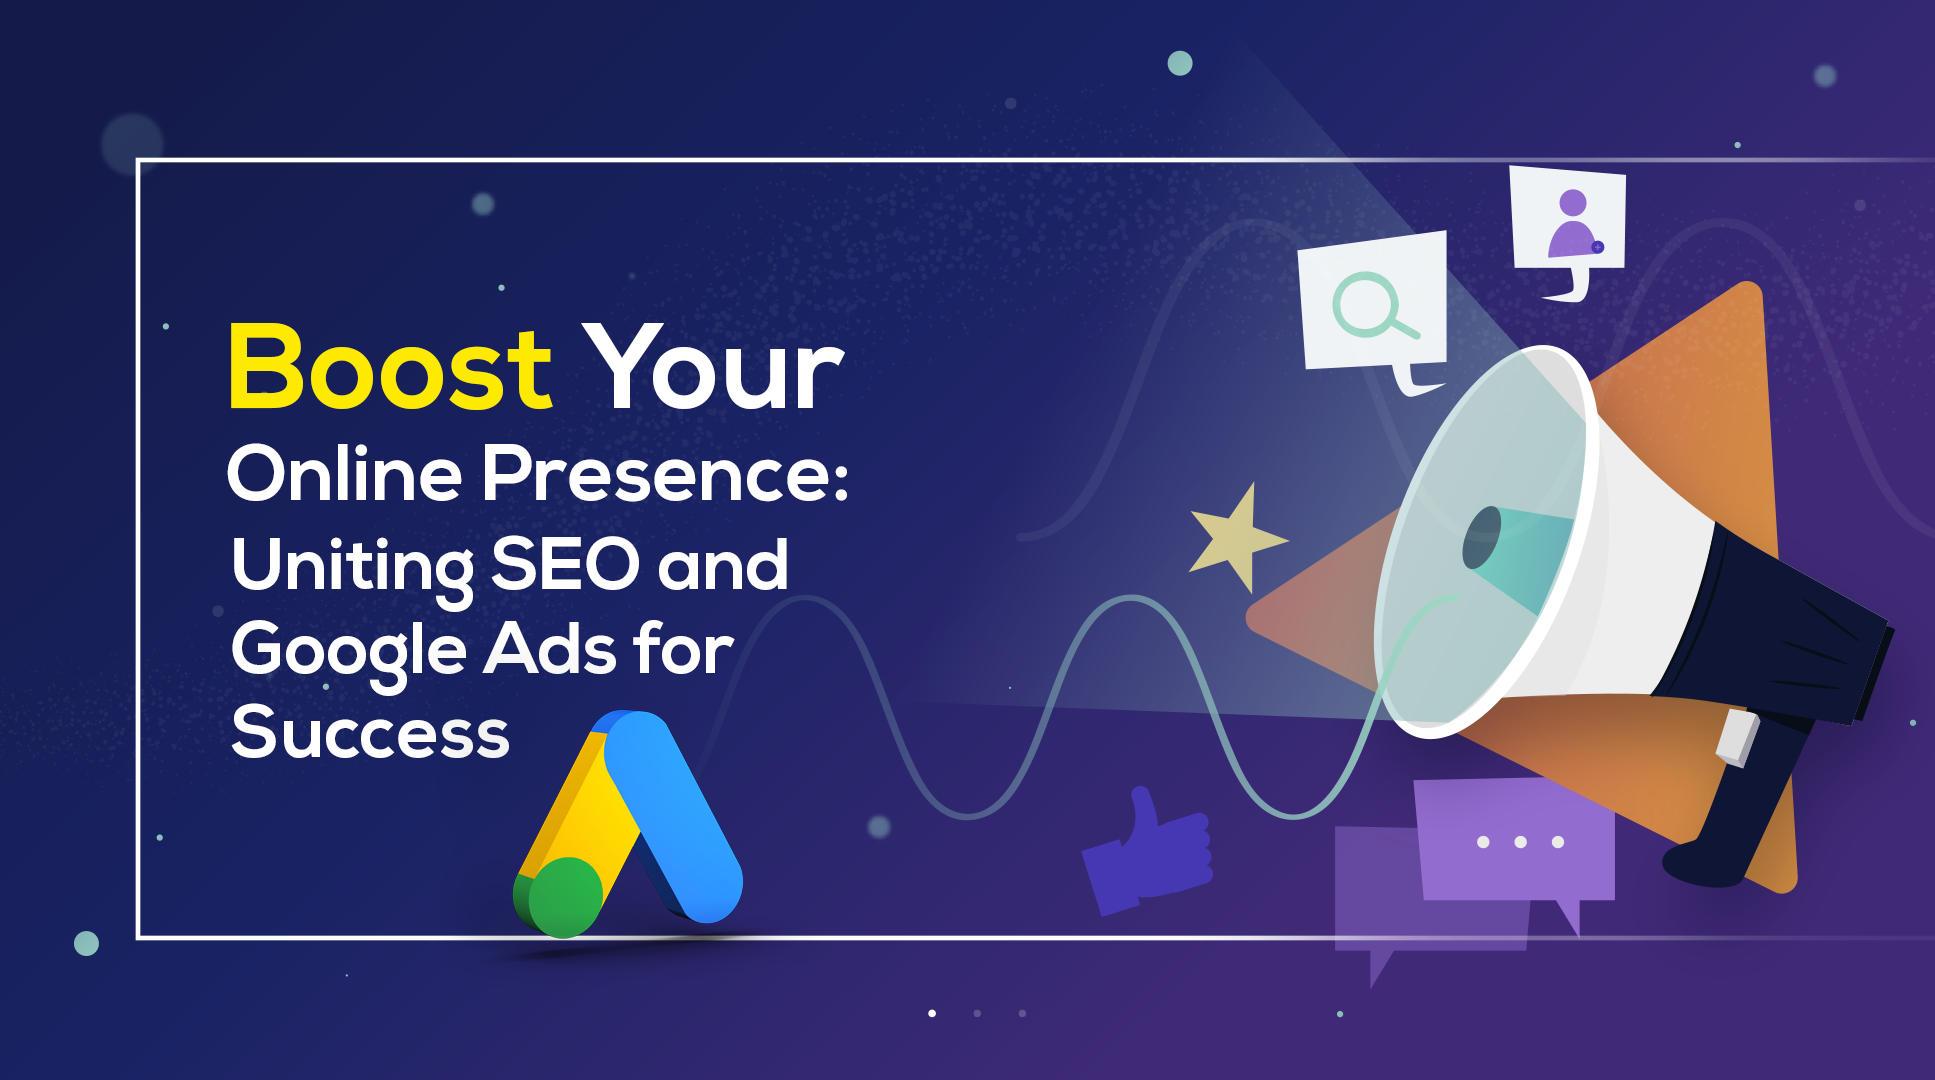 Boost Your Online Presence: Uniting SEO and Google Ads for Success